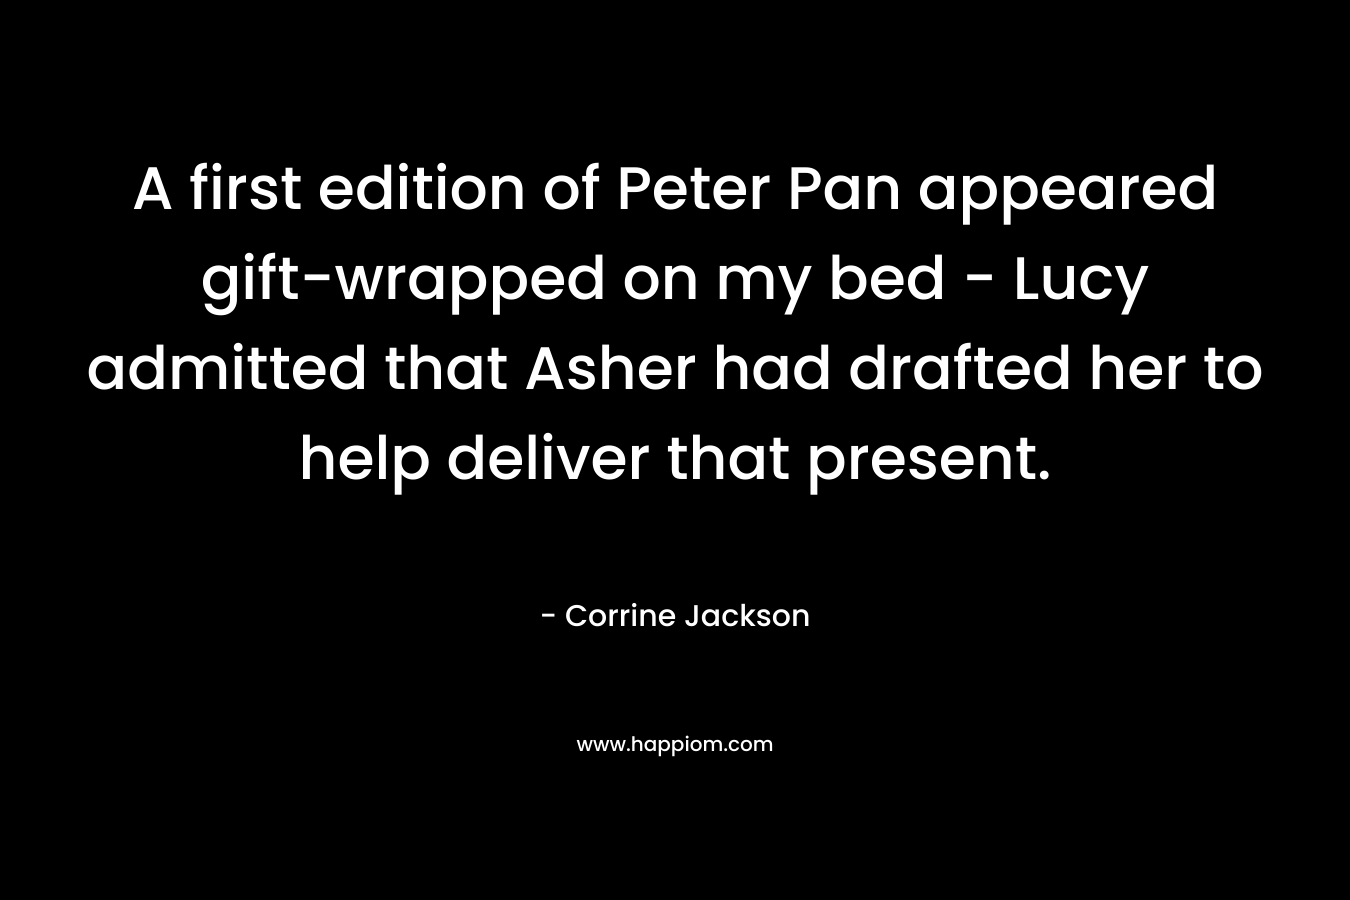 A first edition of Peter Pan appeared gift-wrapped on my bed – Lucy admitted that Asher had drafted her to help deliver that present. – Corrine Jackson